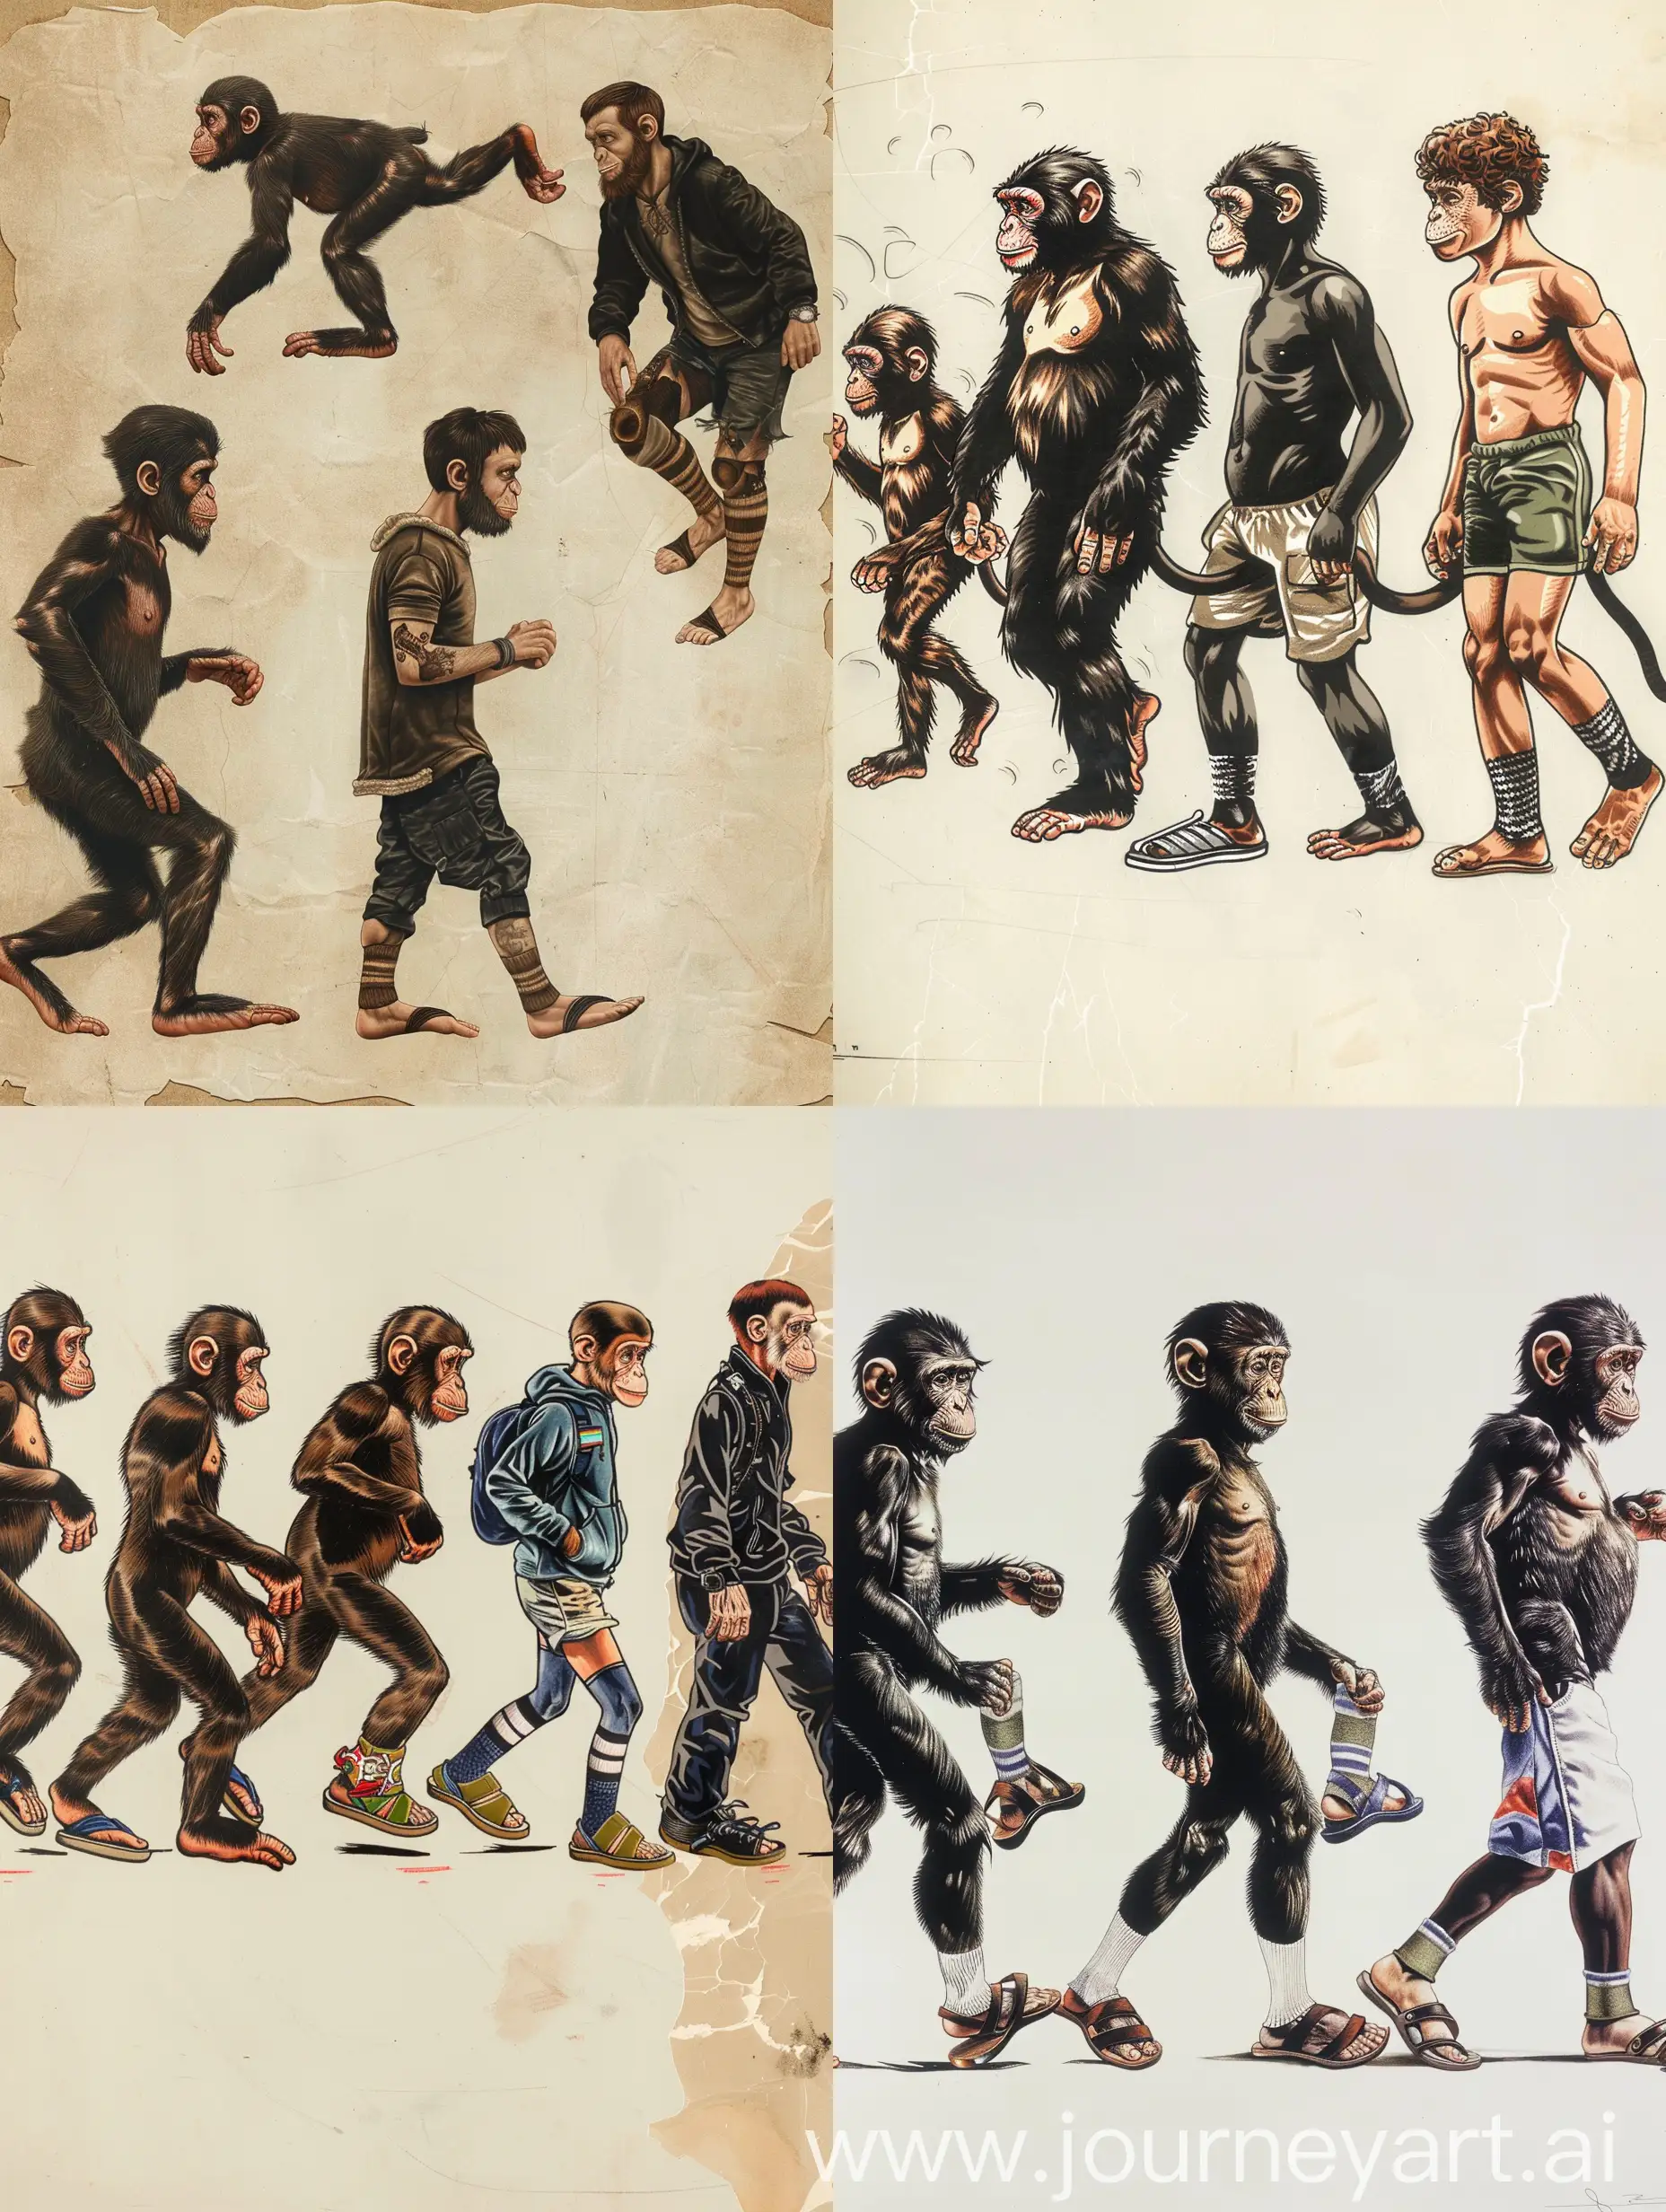 draw an image of human evolution from monkey to young man each of the monkeys and men wearing sandals with socks